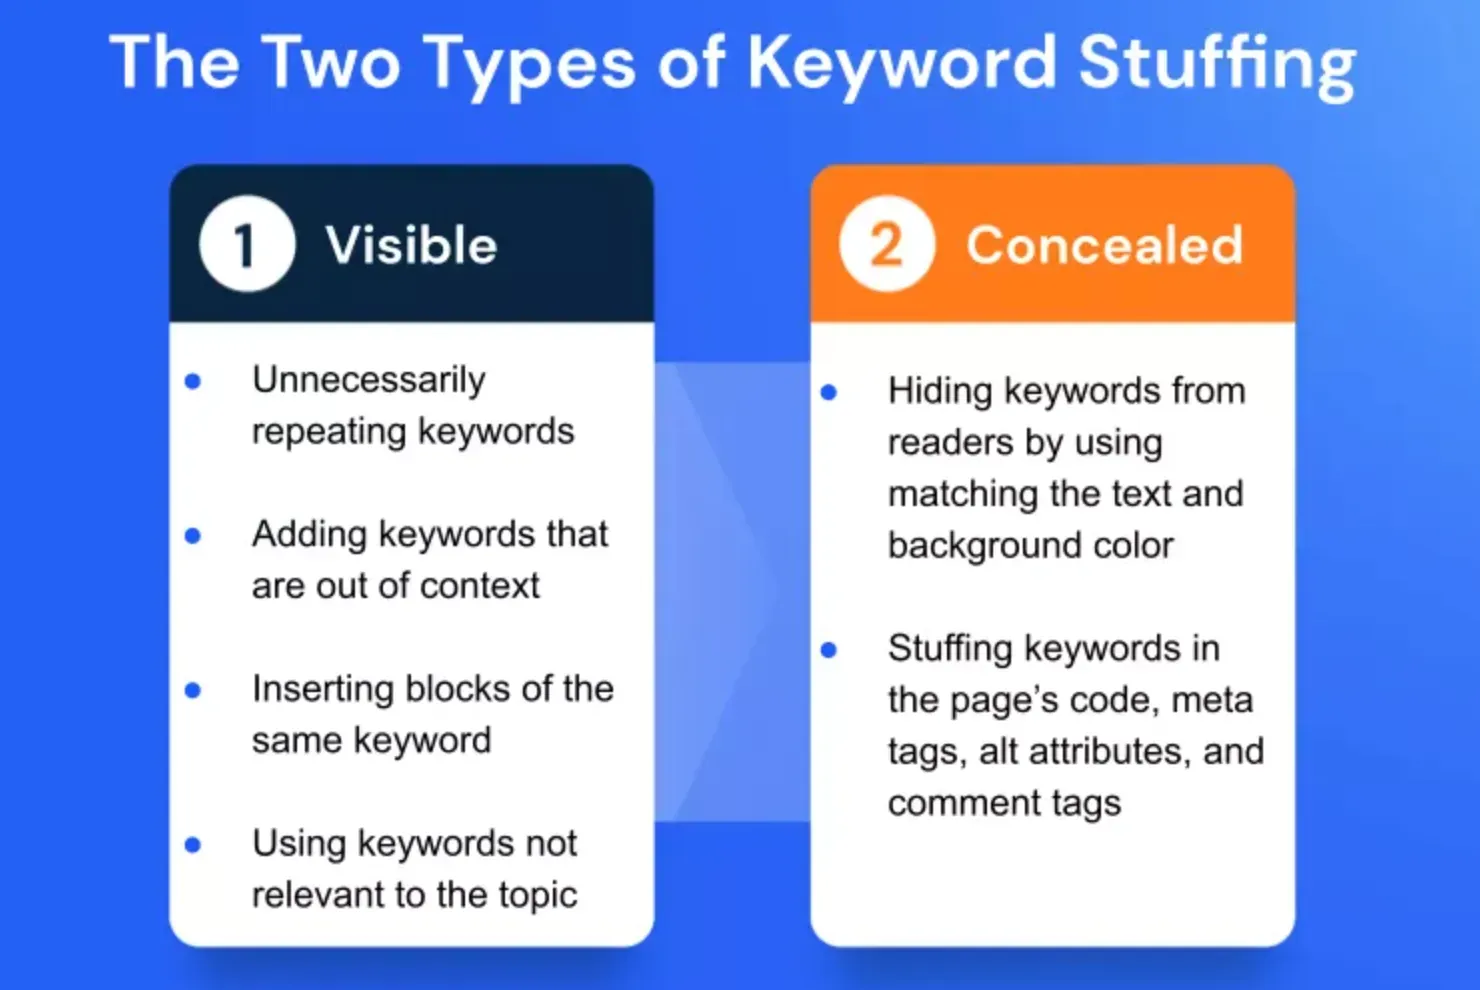 What are the Consequences of Overusing Keywords?